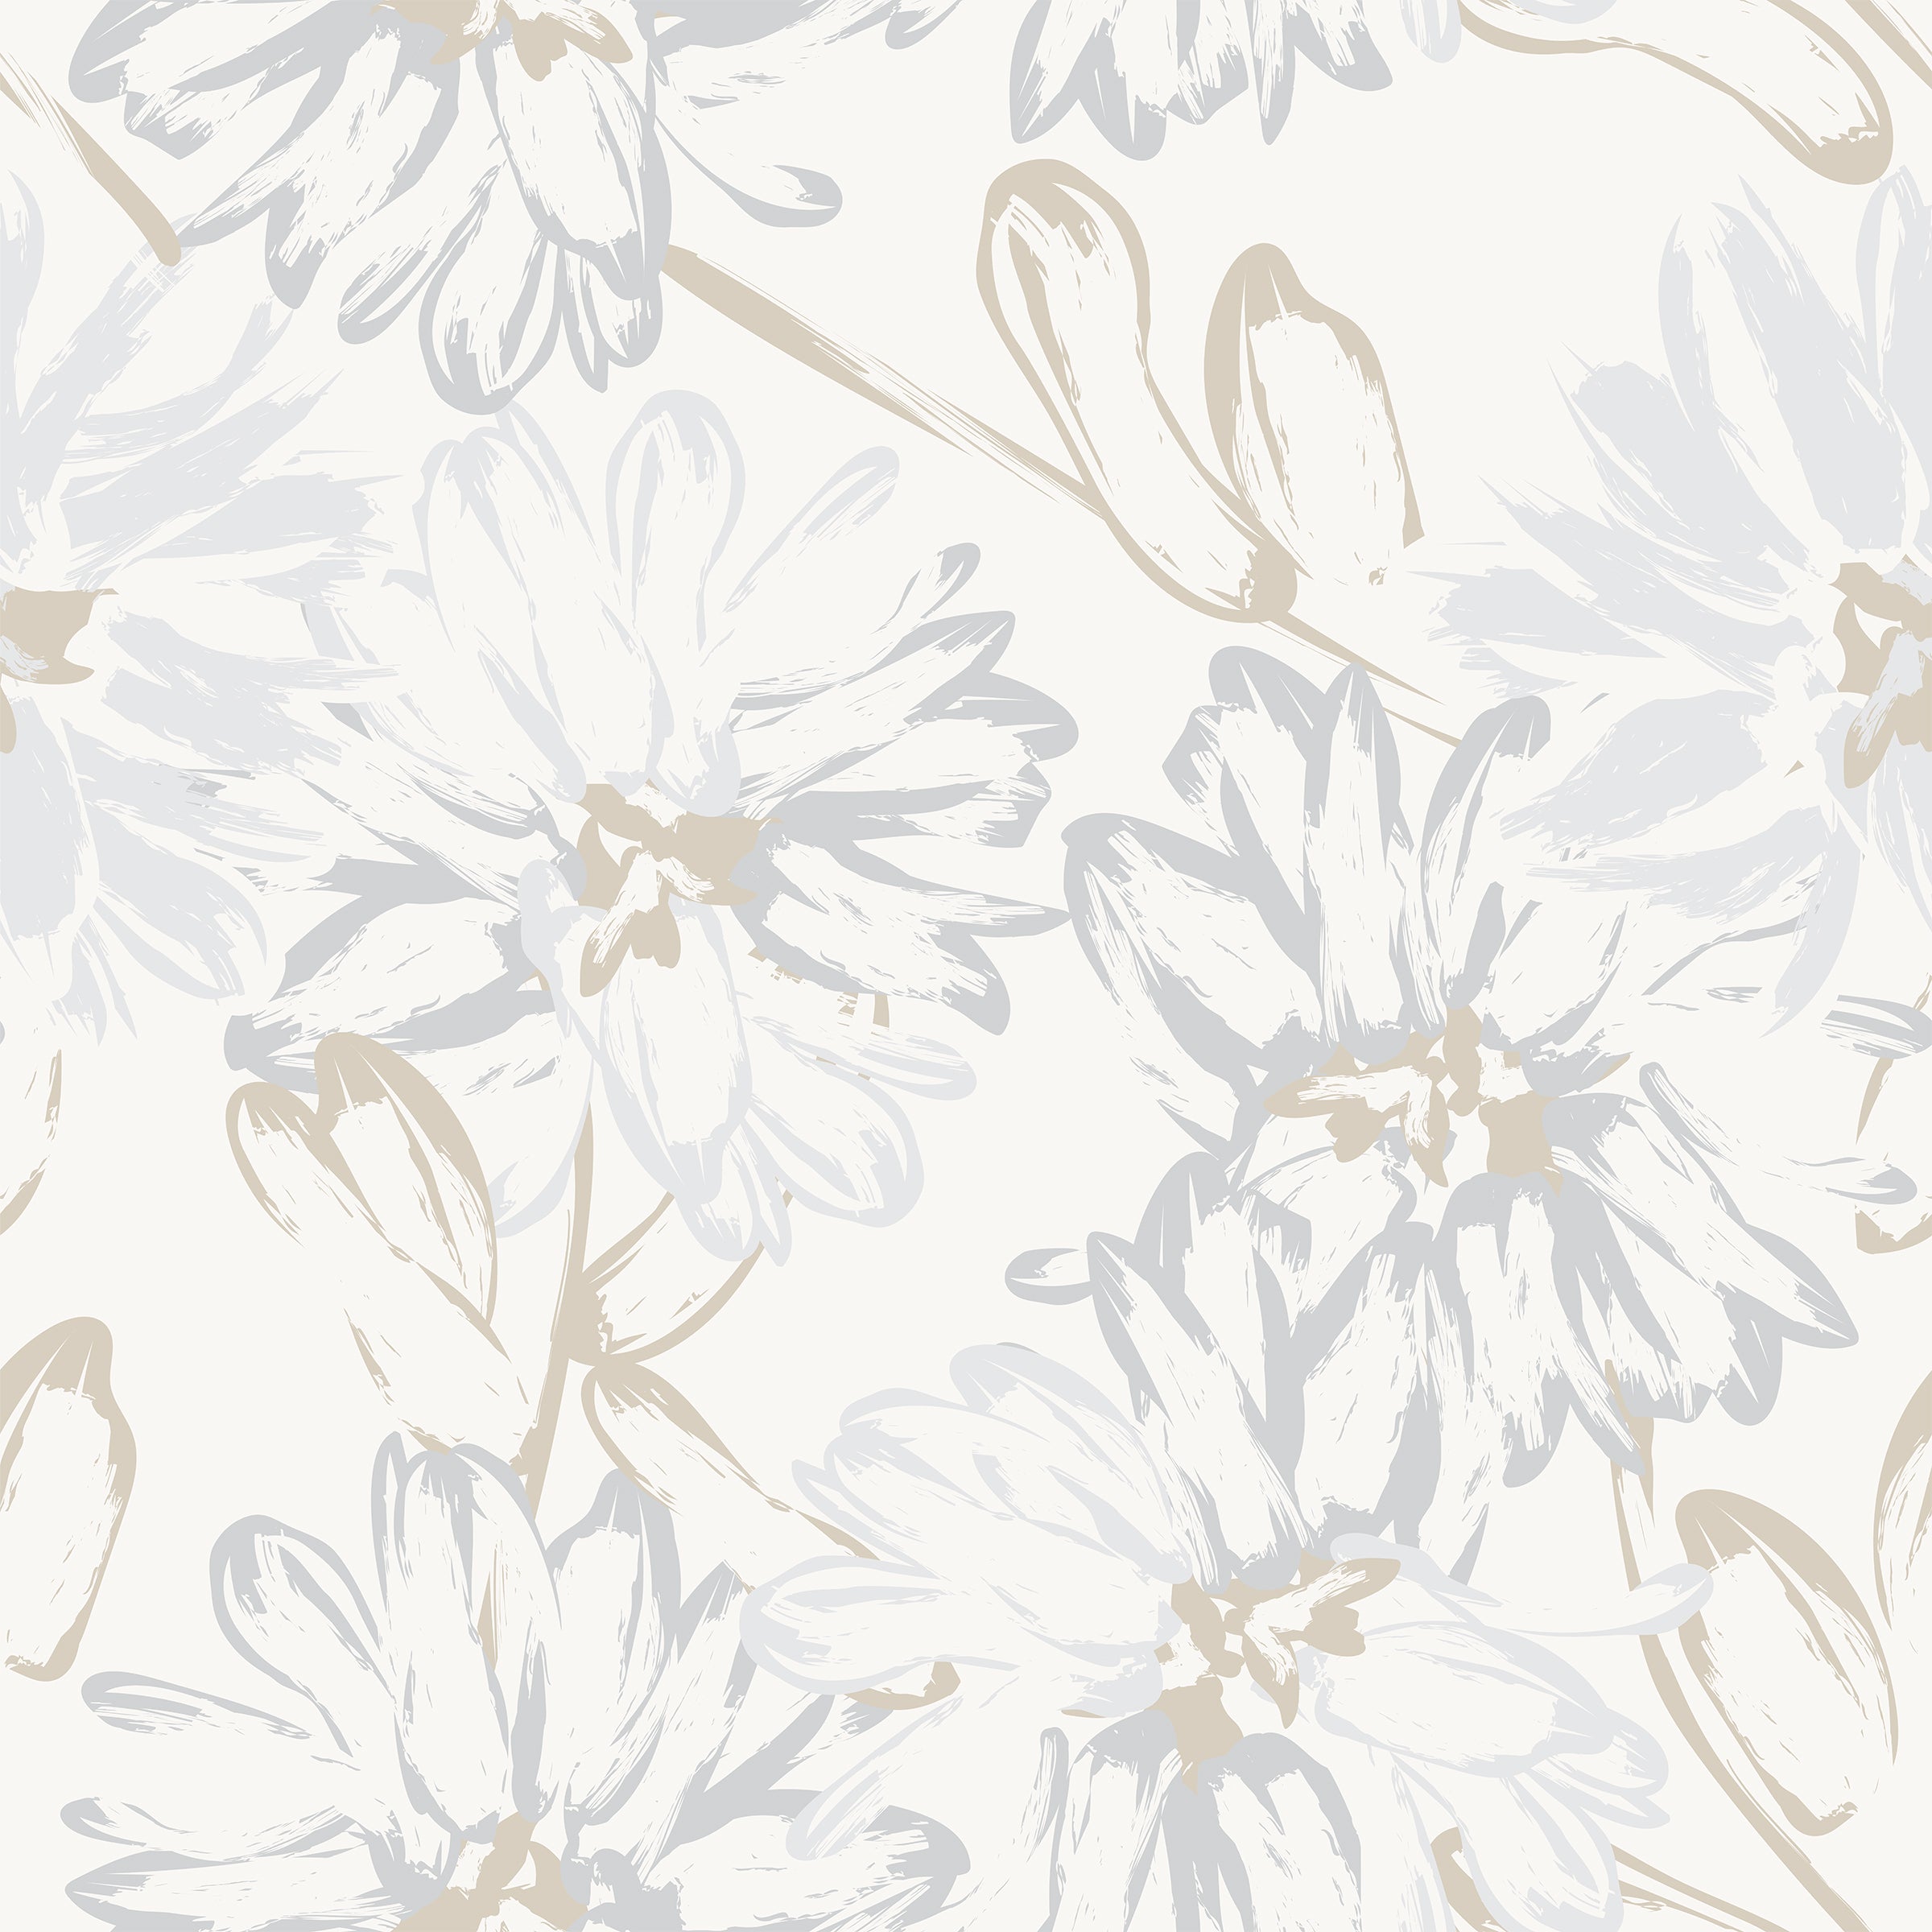 Close-up view of the Modernist Meadows Wallpaper, showcasing its elegant floral design with large flowers and sweeping leaves in muted gray and beige tones. The pattern exudes a modern yet timeless appeal, perfect for adding a sophisticated touch to any interior.